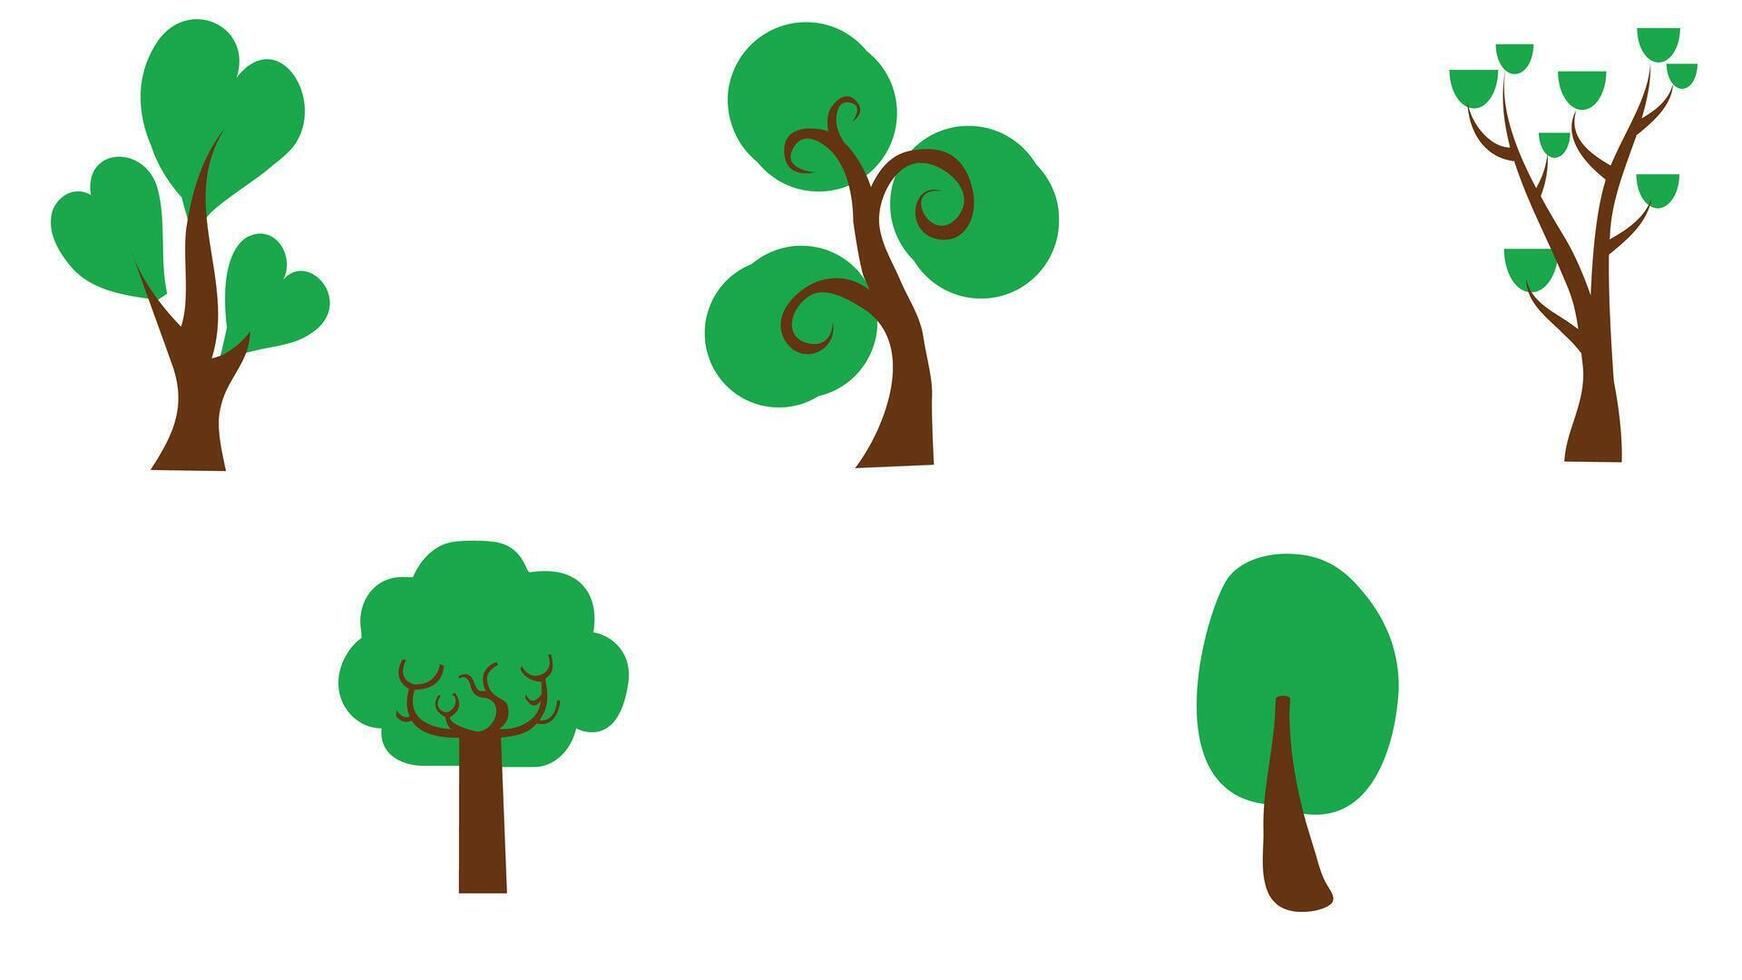 Trees and green leaves collection vector art illustration isolated